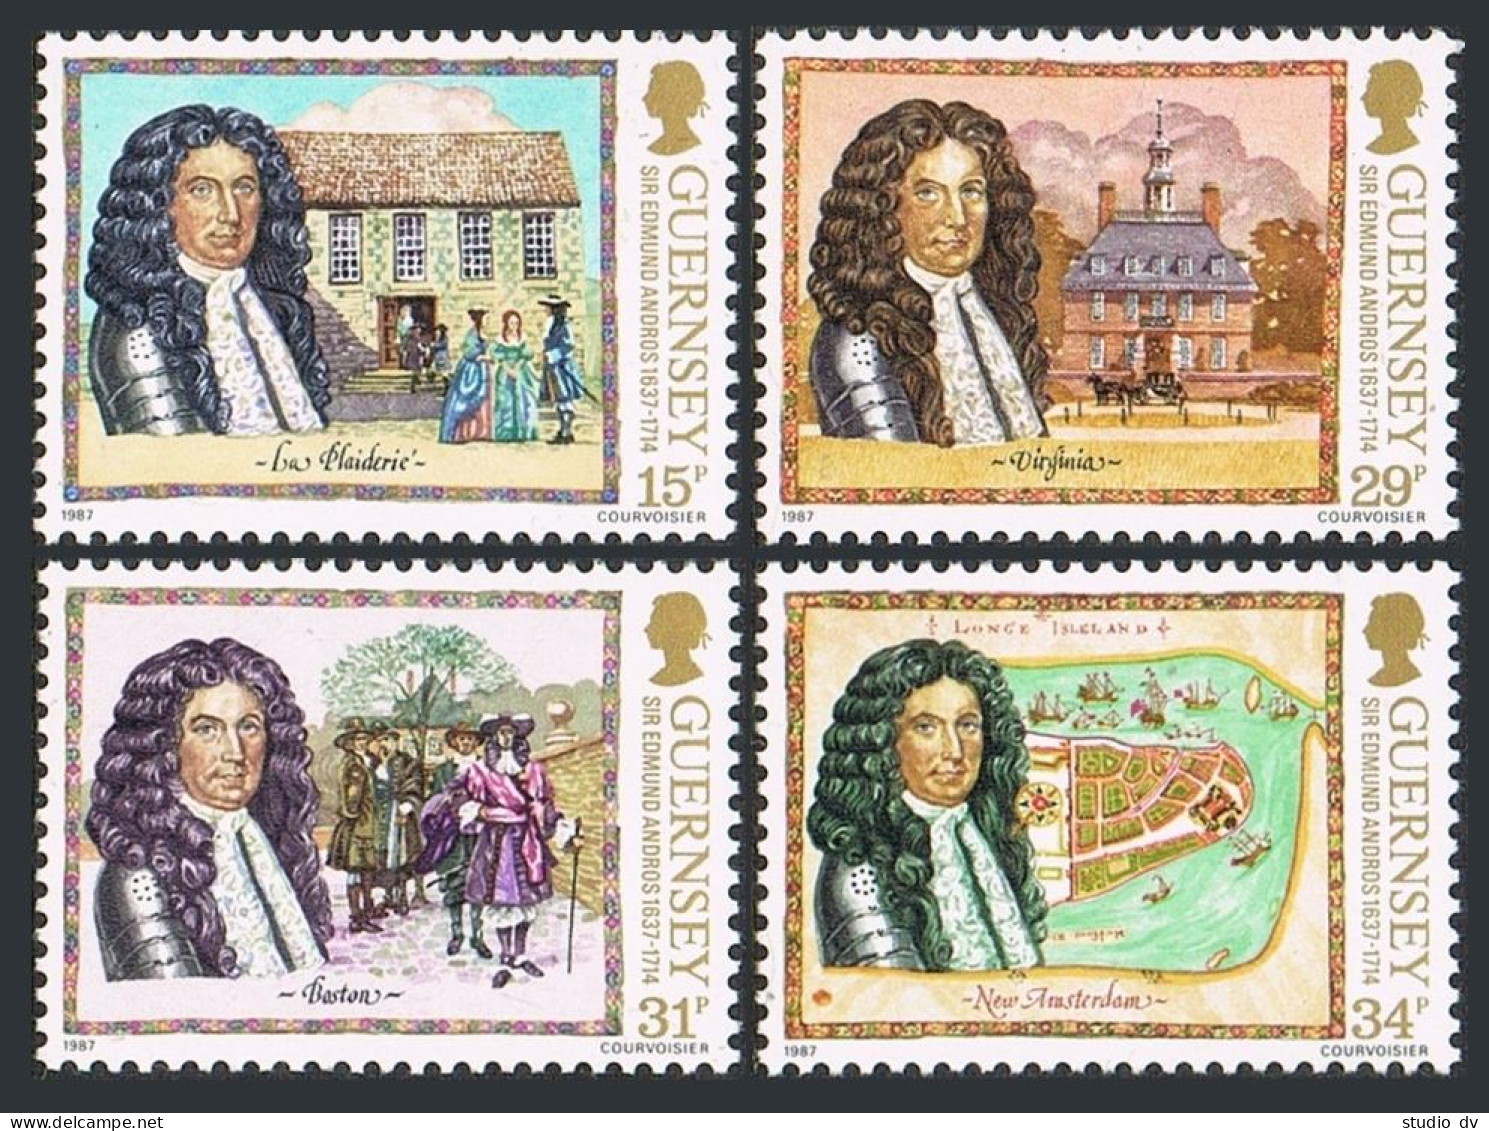 Guernsey 352-355, MNH. Michel 393-396. Sir Edmund Andros,1987. Map,Palace,Court. - Guernesey